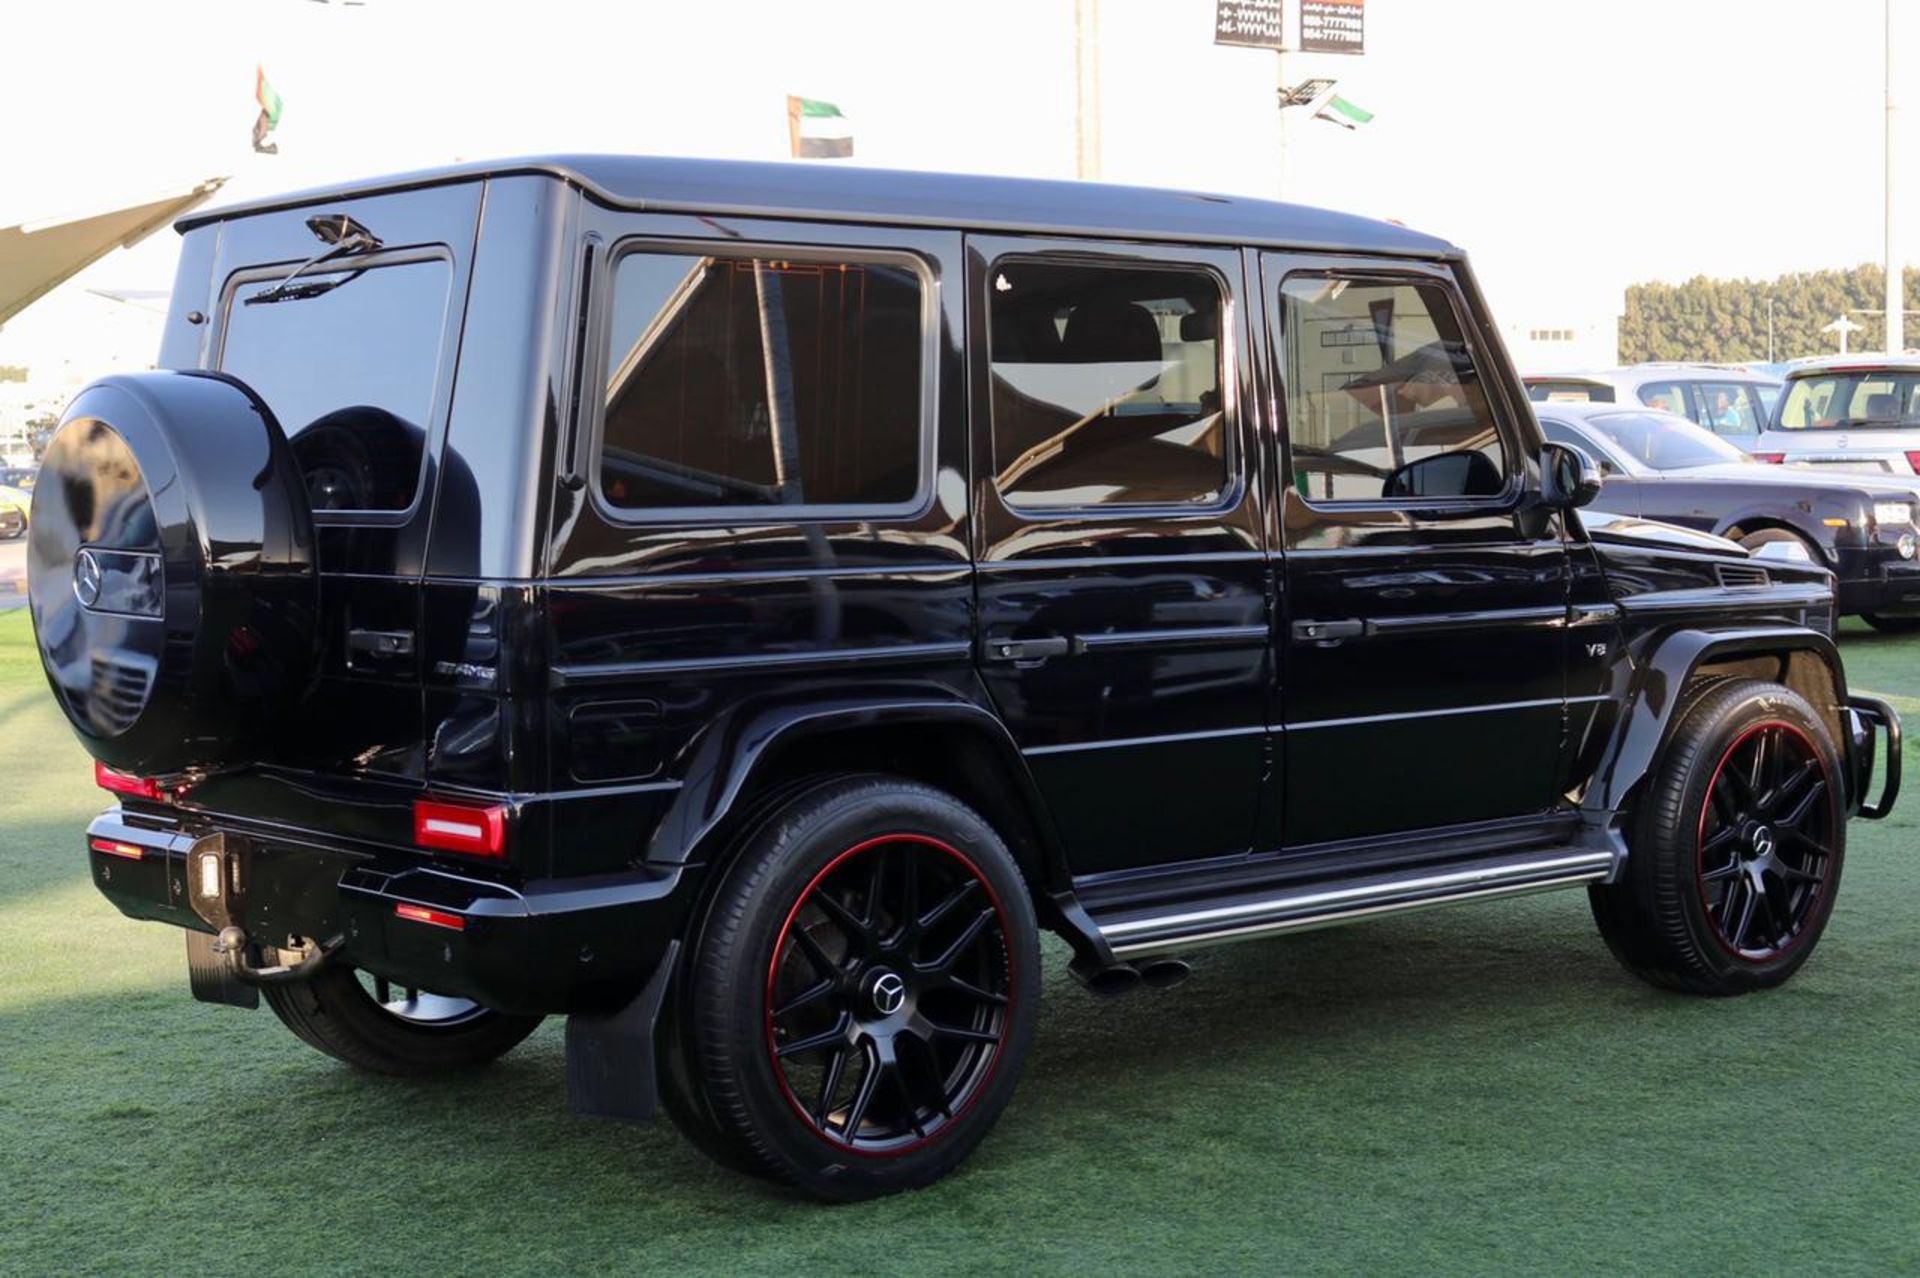 2011 MERCEDES G WAGON G55 changed to a 2020 G63 look Full outside exterior complete package !! - Image 6 of 36